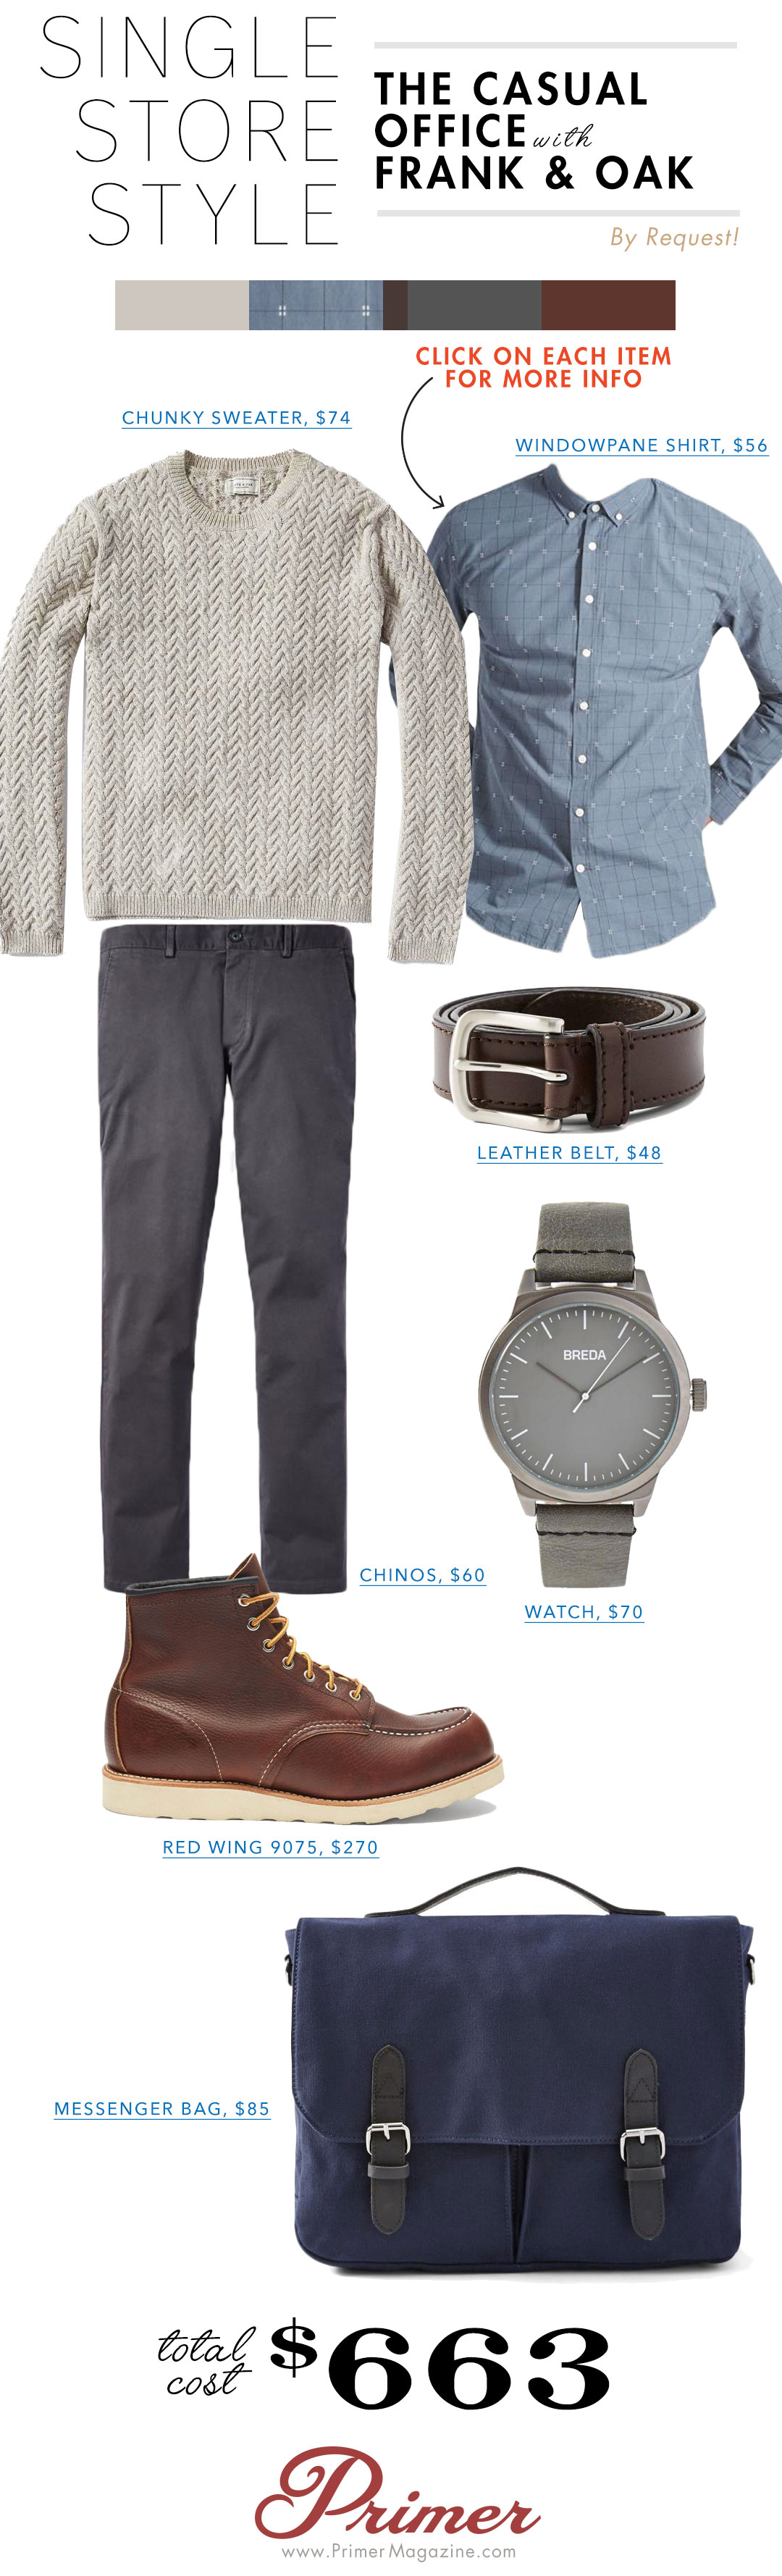 Single Store Style Frank and Oak - Gray sweater, blue shirt, gray pants and boots